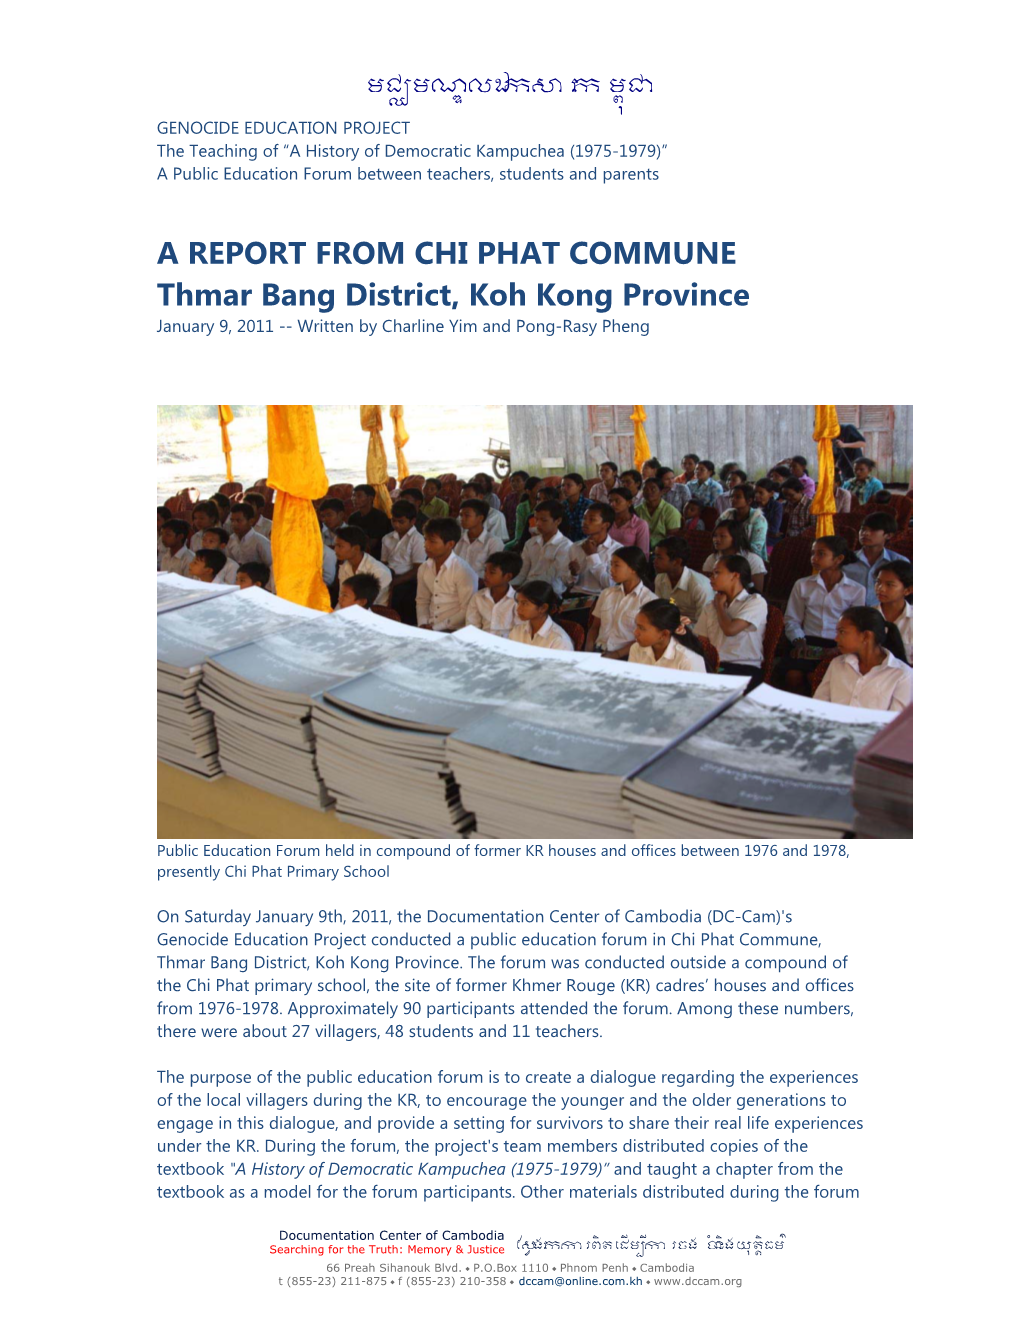 REPORT from CHI PHAT COMMUNE Thmar Bang District, Koh Kong Province January 9, 2011 -- Written by Charline Yim and Pong-Rasy Pheng